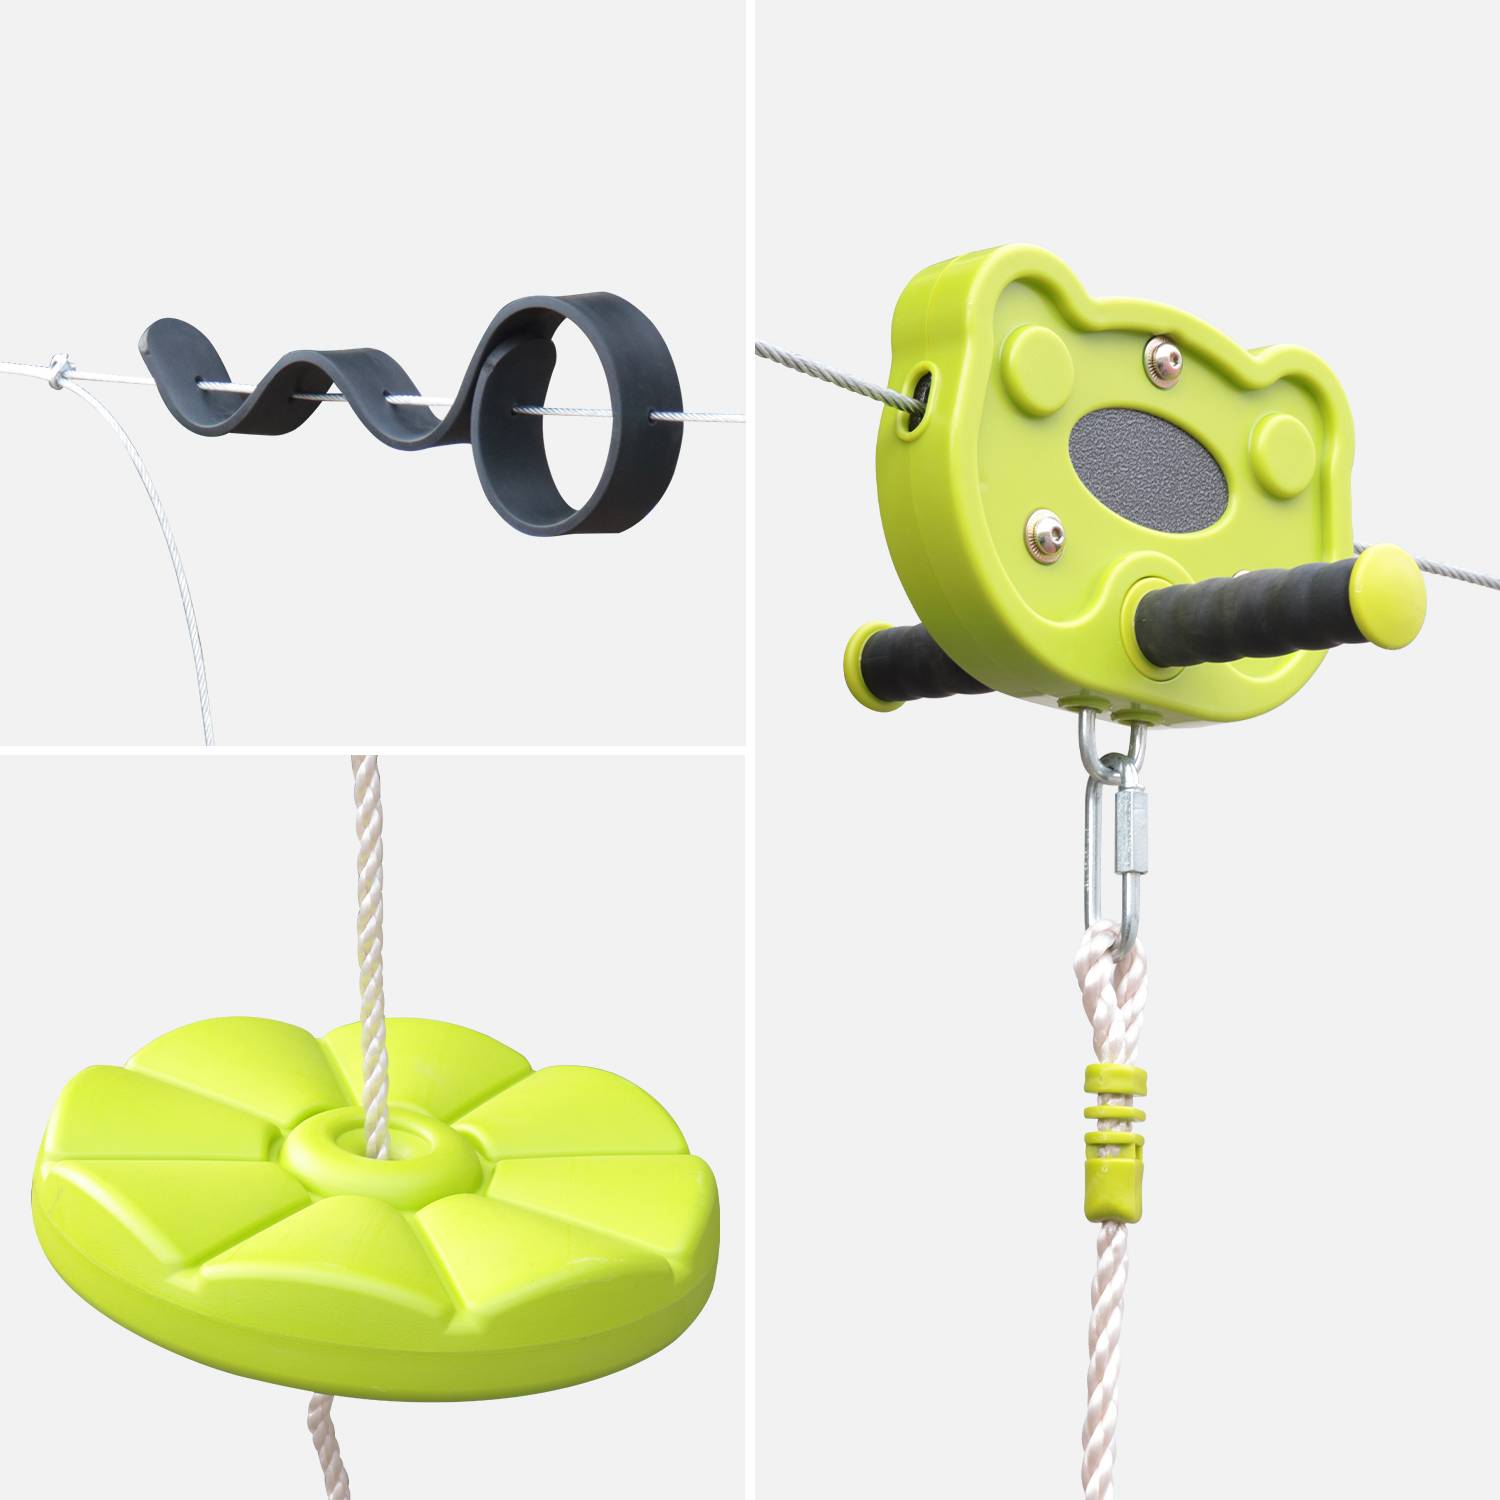 Zip line for children, 30m long with disc swing, anti-slip handles, cushioning system - Alize,sweeek,Photo2